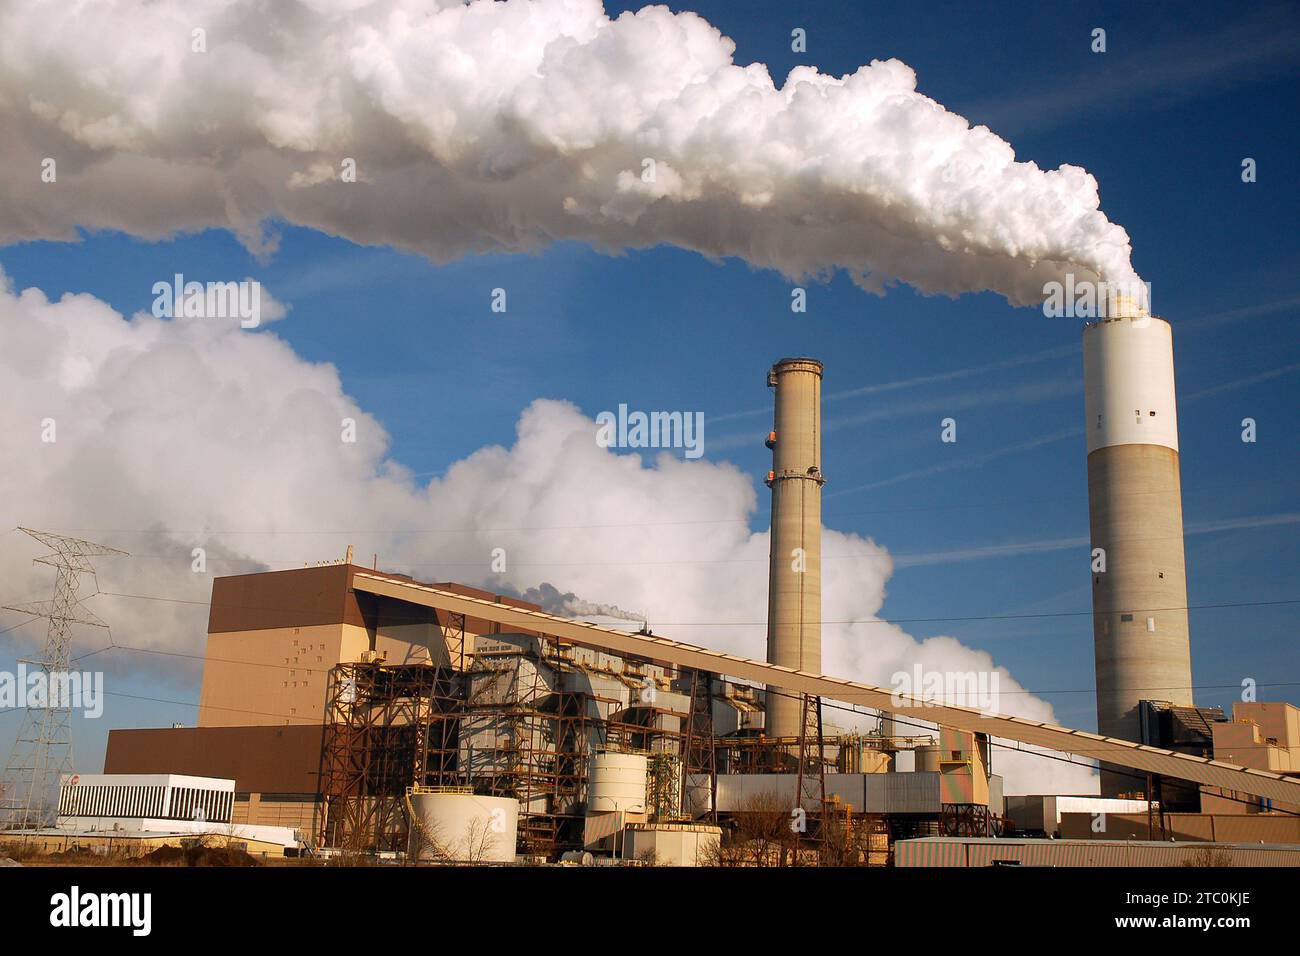 Pollution billows into the sky creating an environmental hazard affecting climate change and global warming Stock Photo